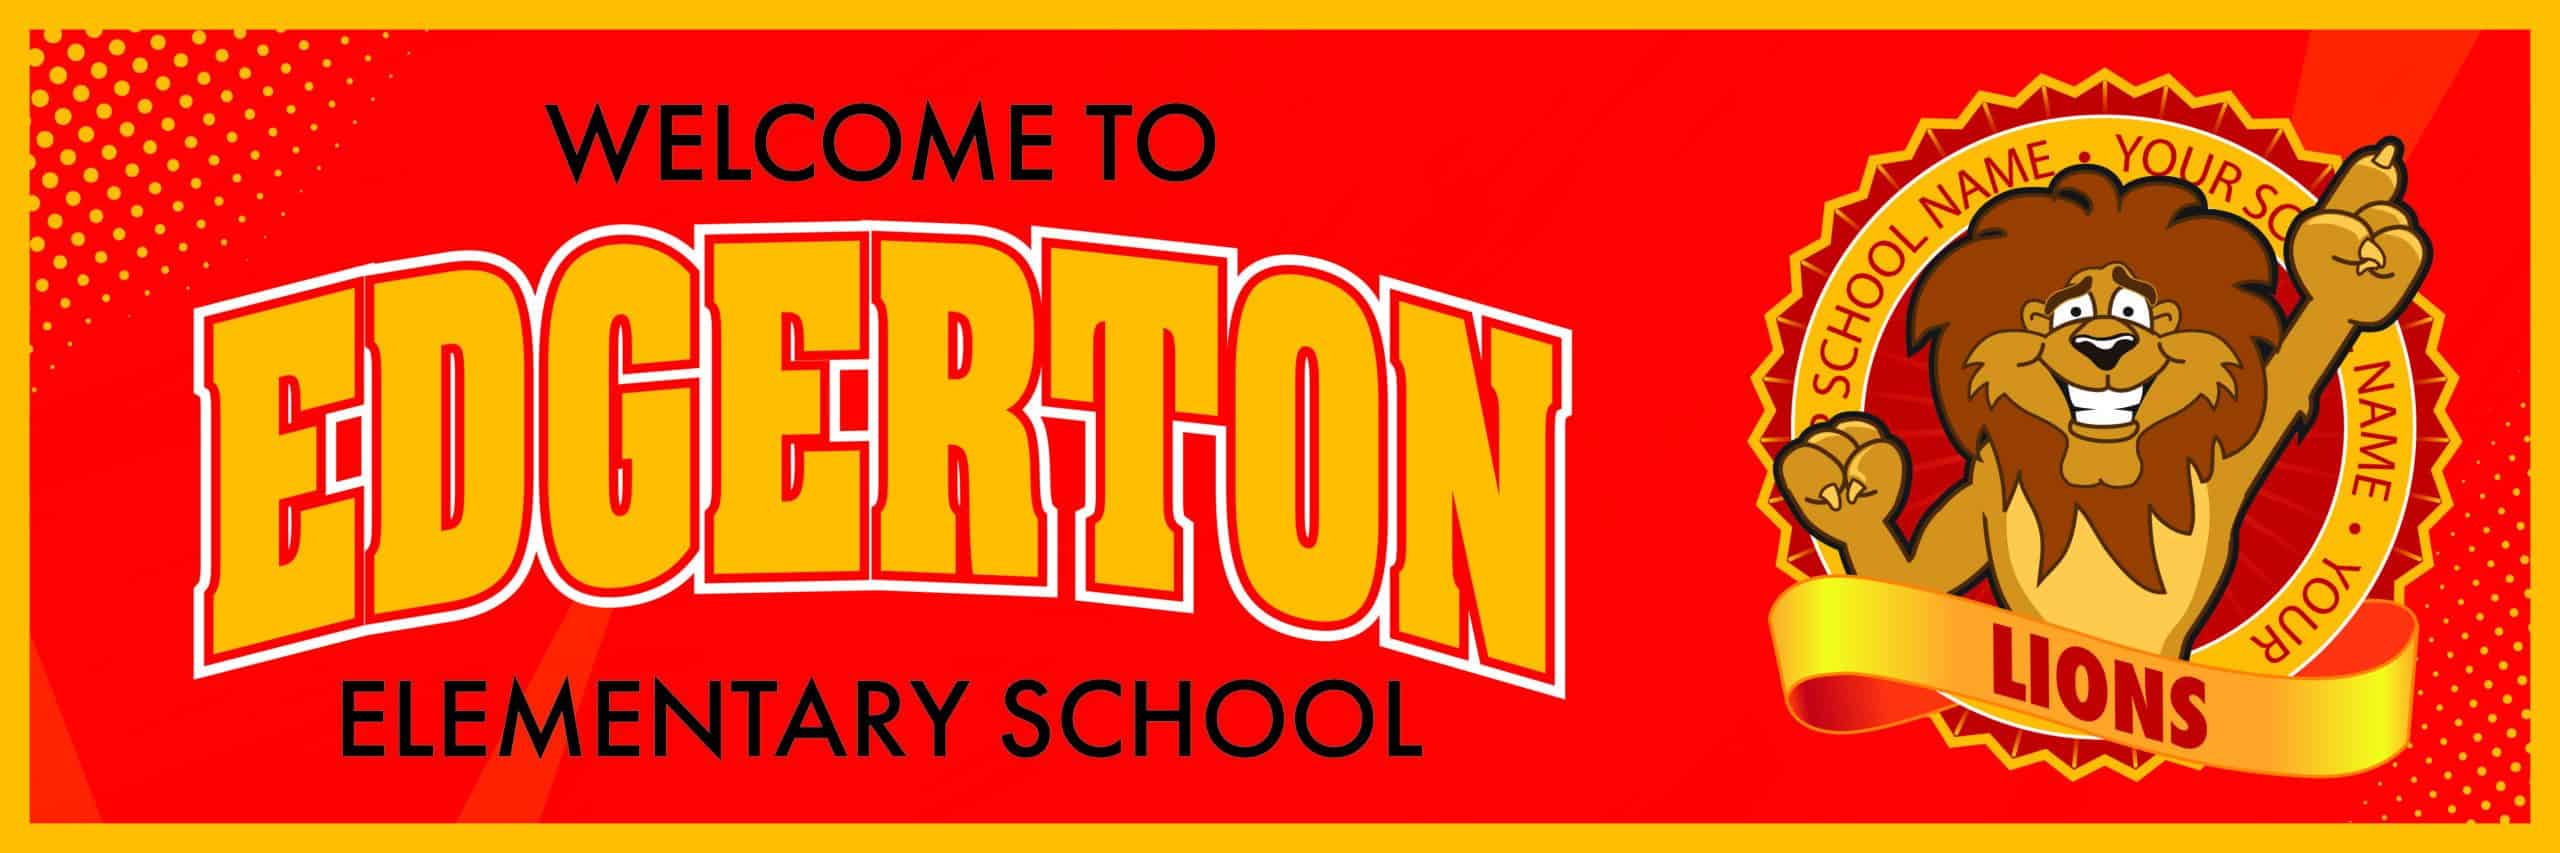 Welcome-Banner-simple-Lion